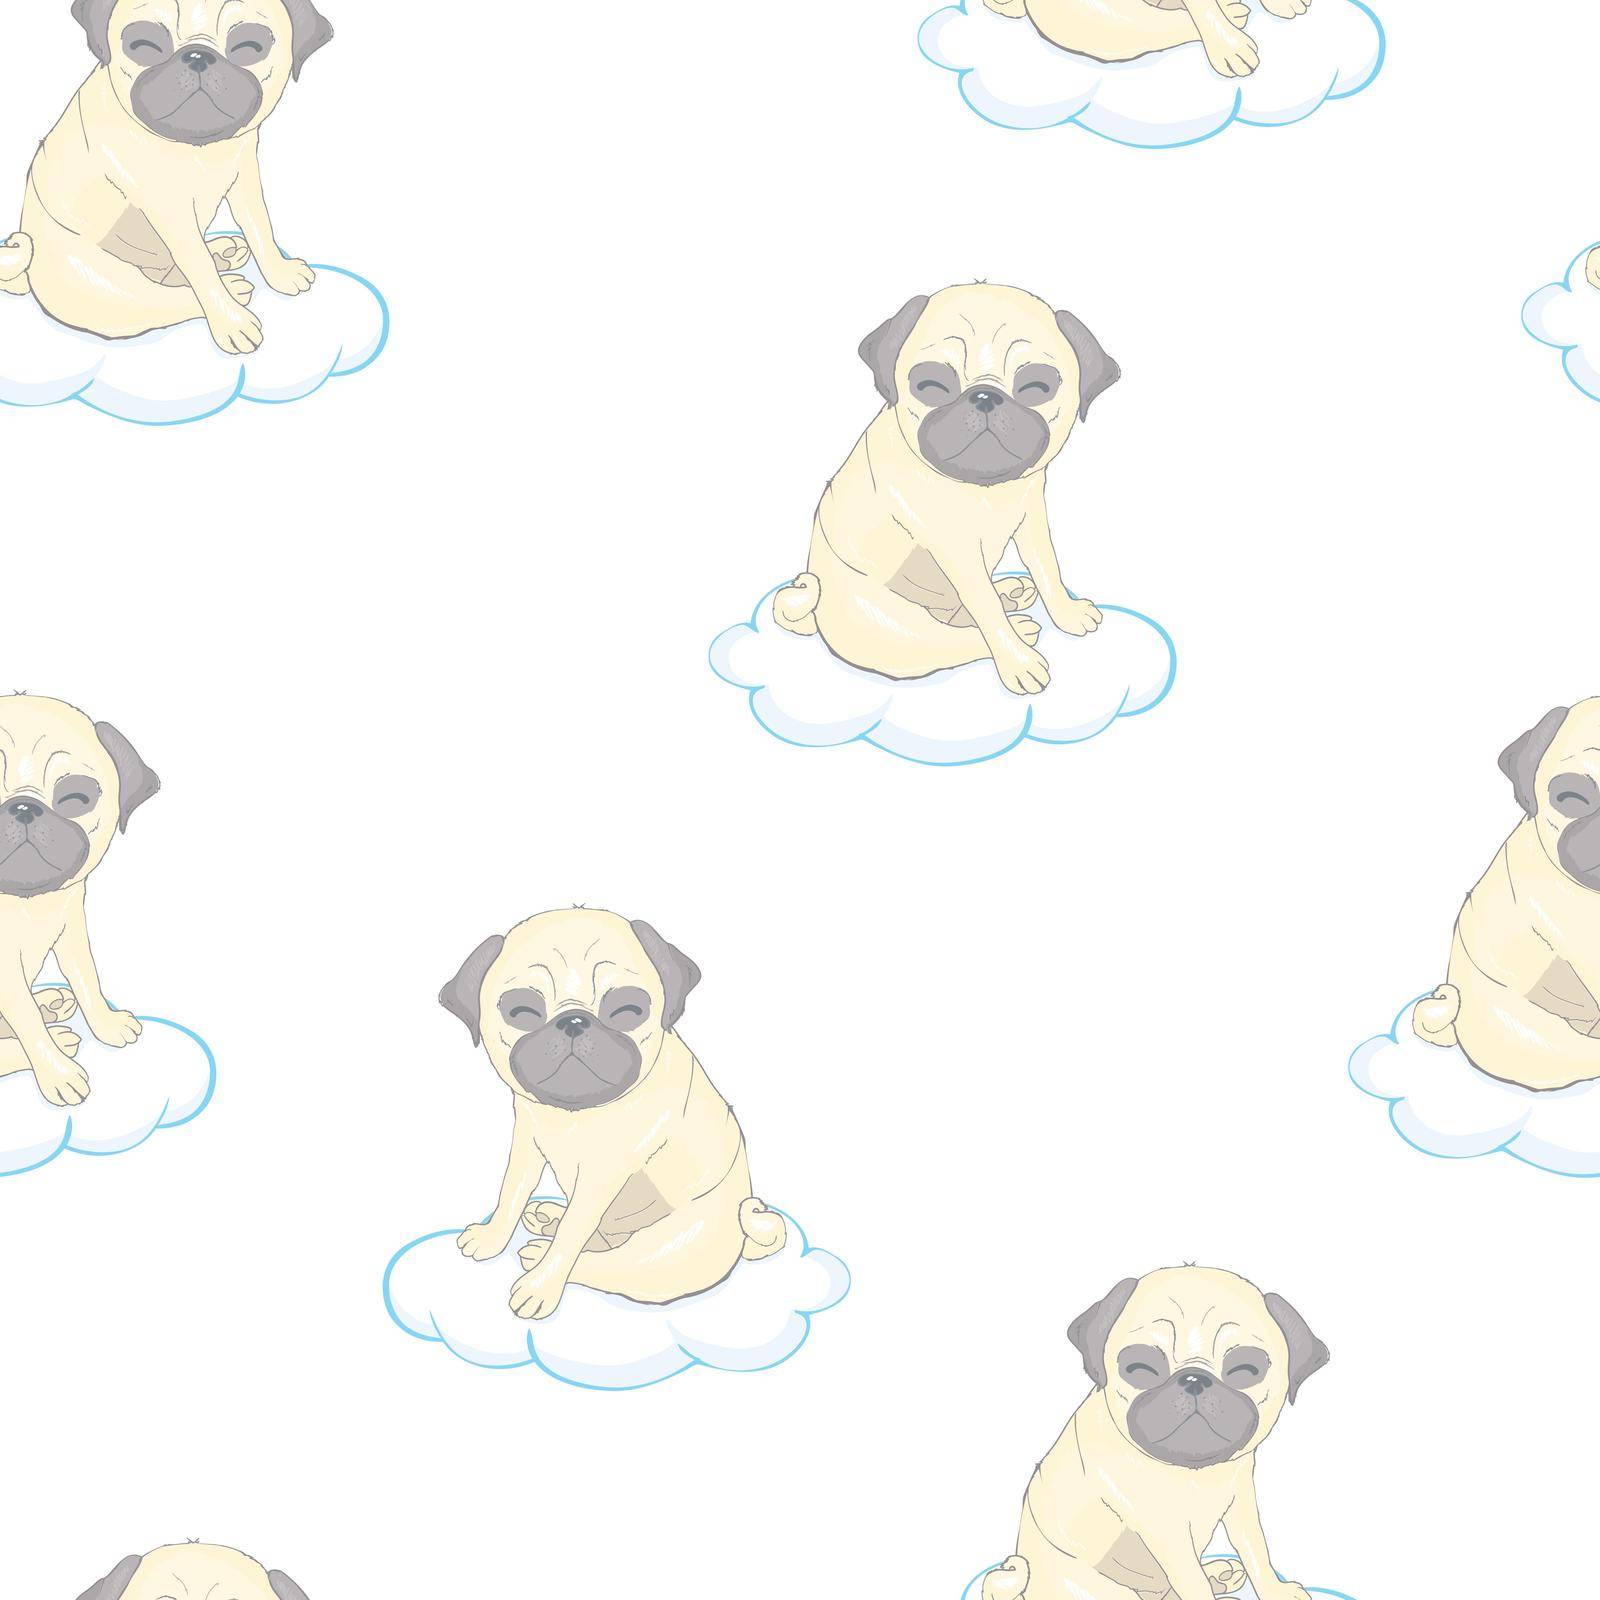 Pug dog cartoon illustration. Cute friendly fat chubby fawn sitting pug puppy, smiling with tongue out. Vector cute pug vector pattern